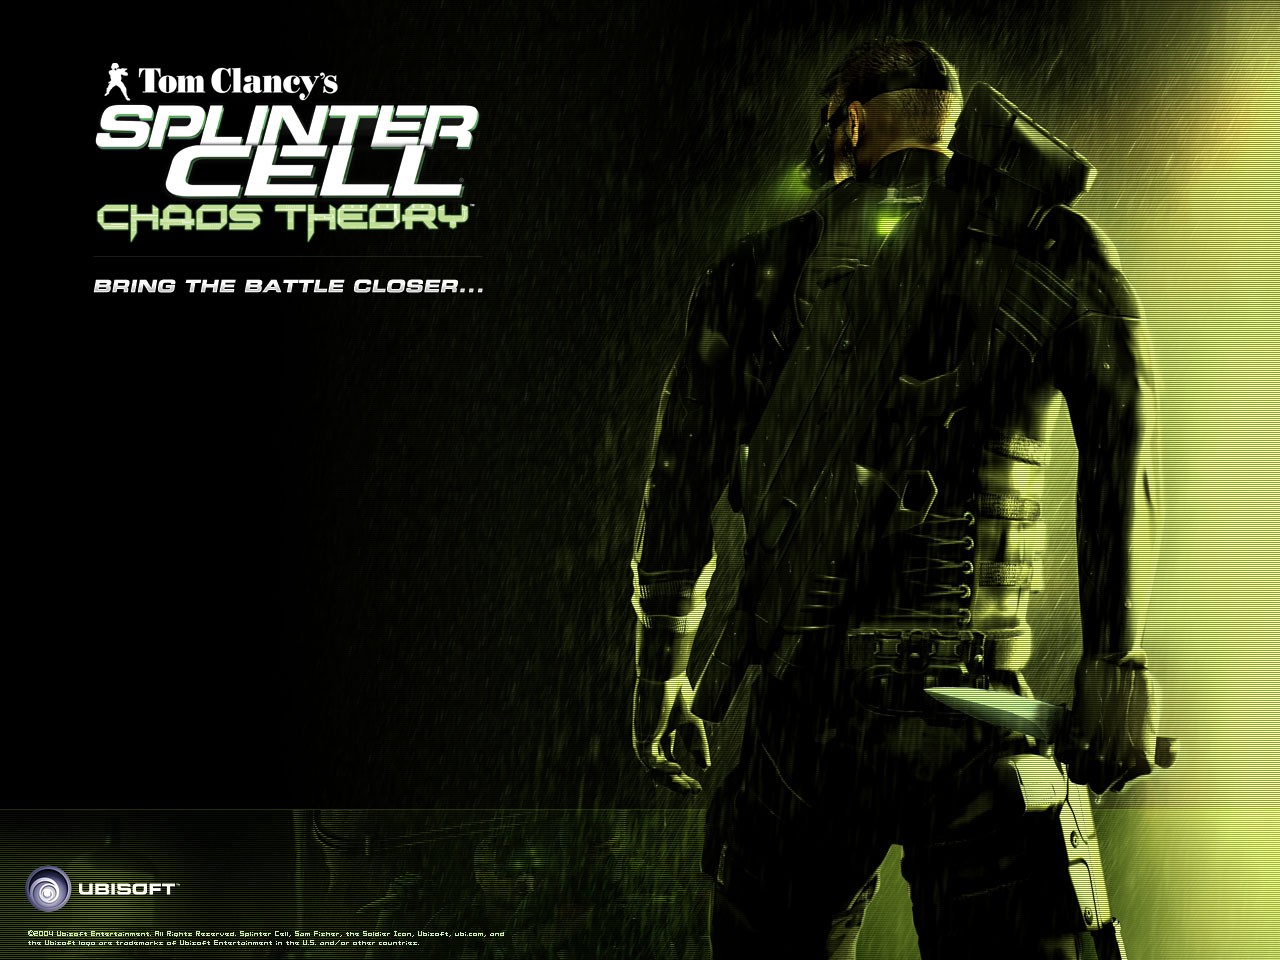 Metal Gear Solid 3: Snake Eater vs Splinter Cell: Chaos Theory ...